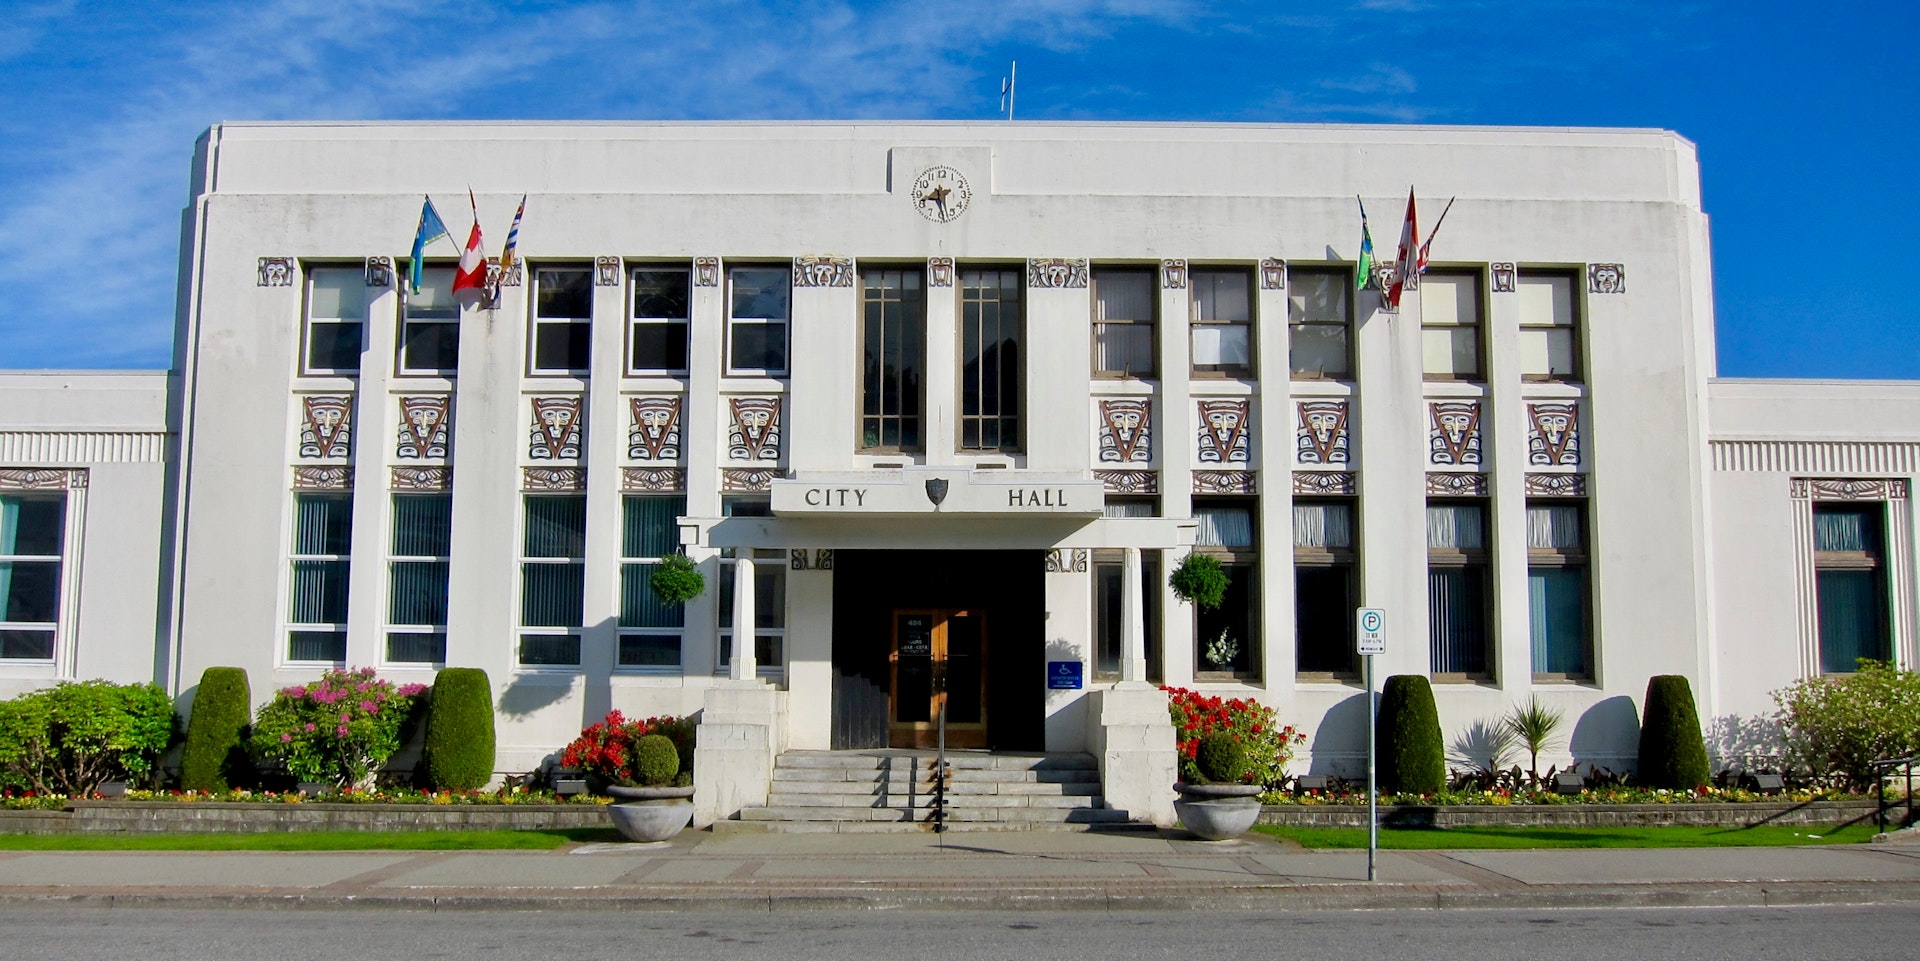 Exterior of City Hall in Prince Rupert, BC